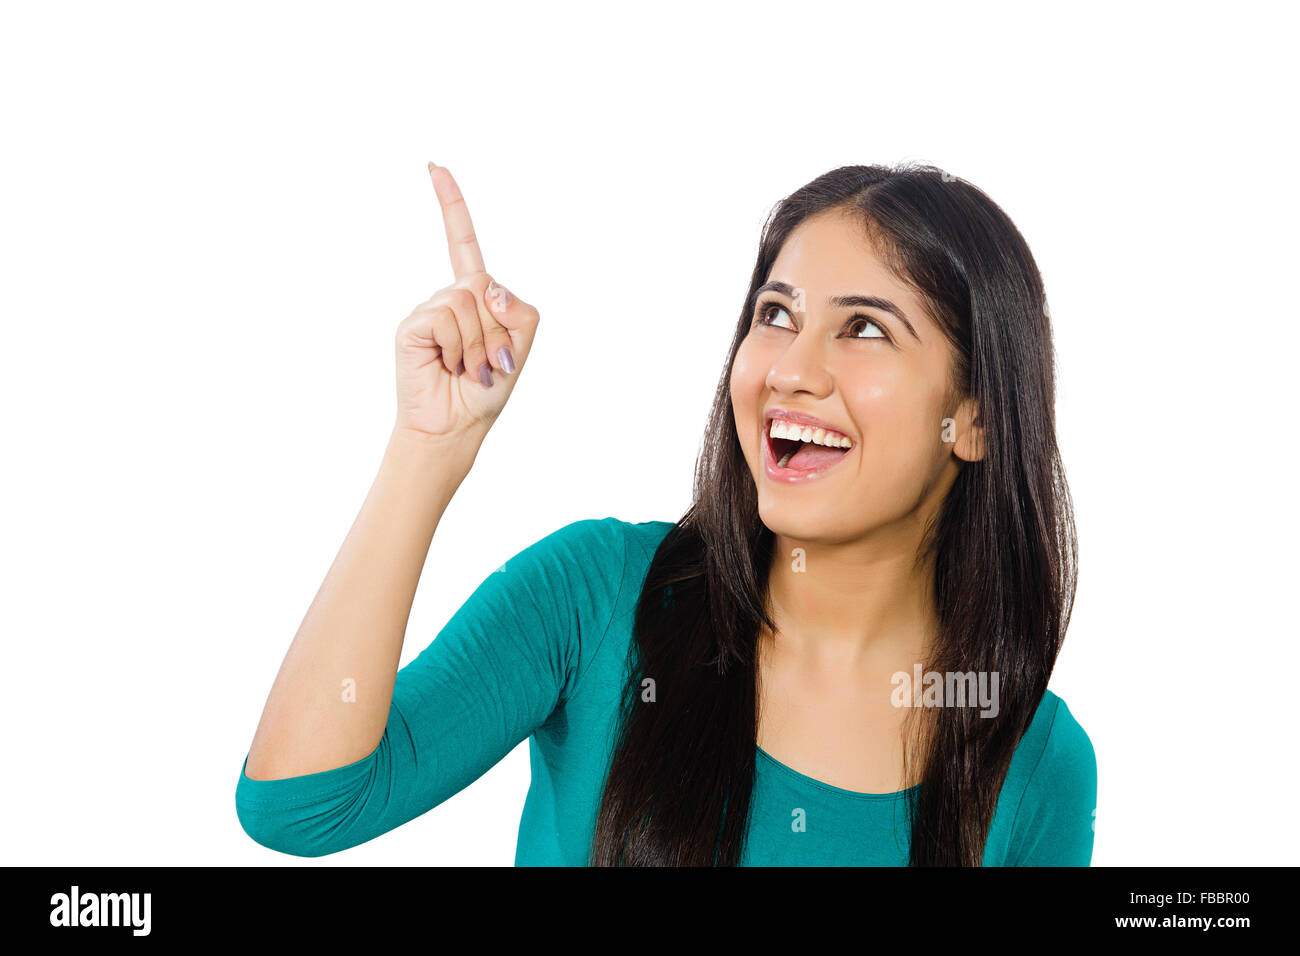 1 indian Young Woman finger pointing showing Stock Photo